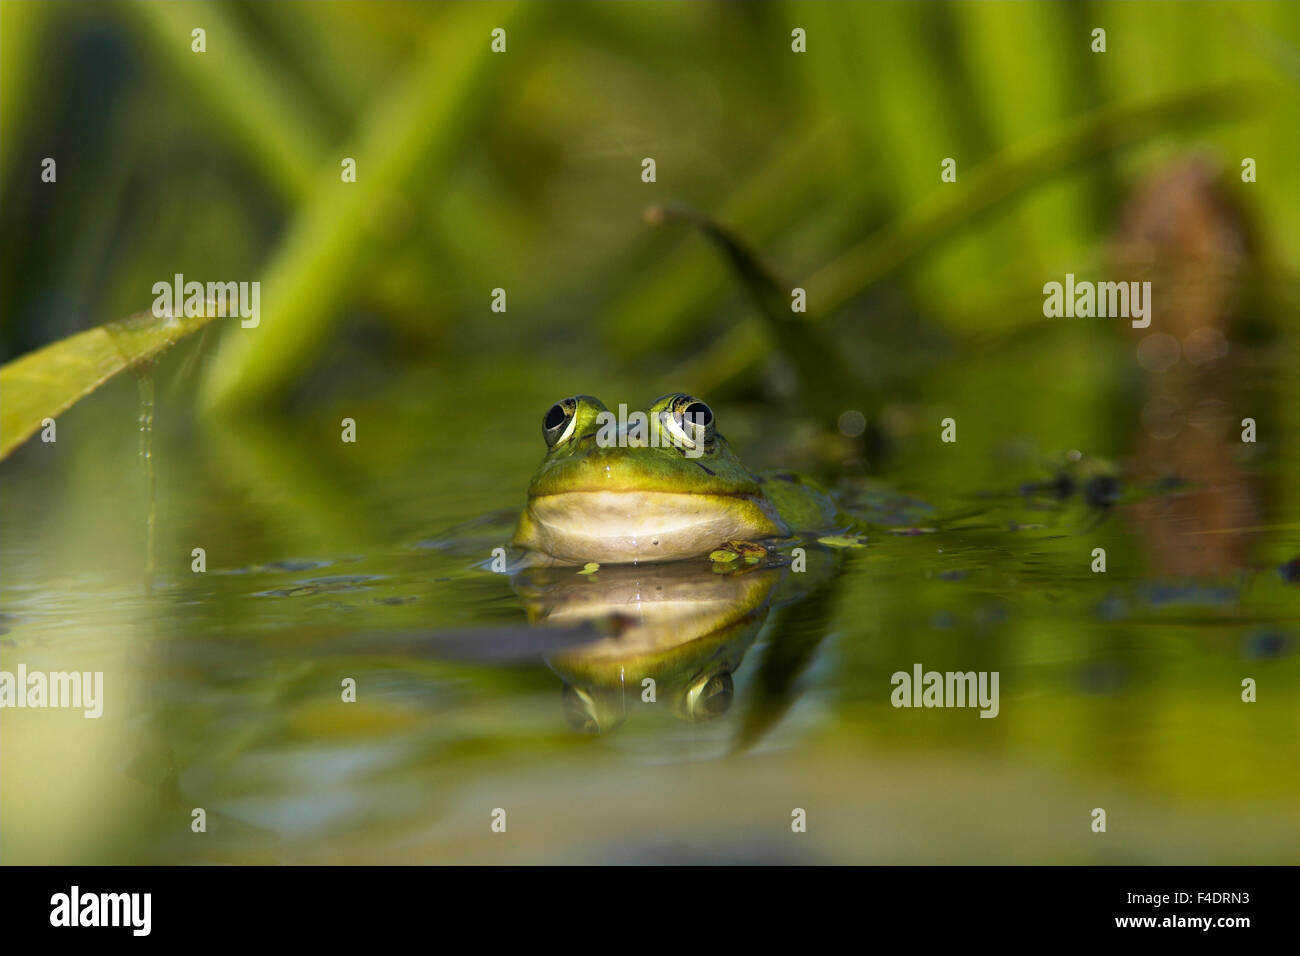 Edible Frog (Rana esculenta or Pelophylax kl. esculentus) in the Danube Delta swimming in dense stands of Water soldier (Stratiotes aloides) Europe, Eastern Europe, Romania, Danube Delta. Stock Photo